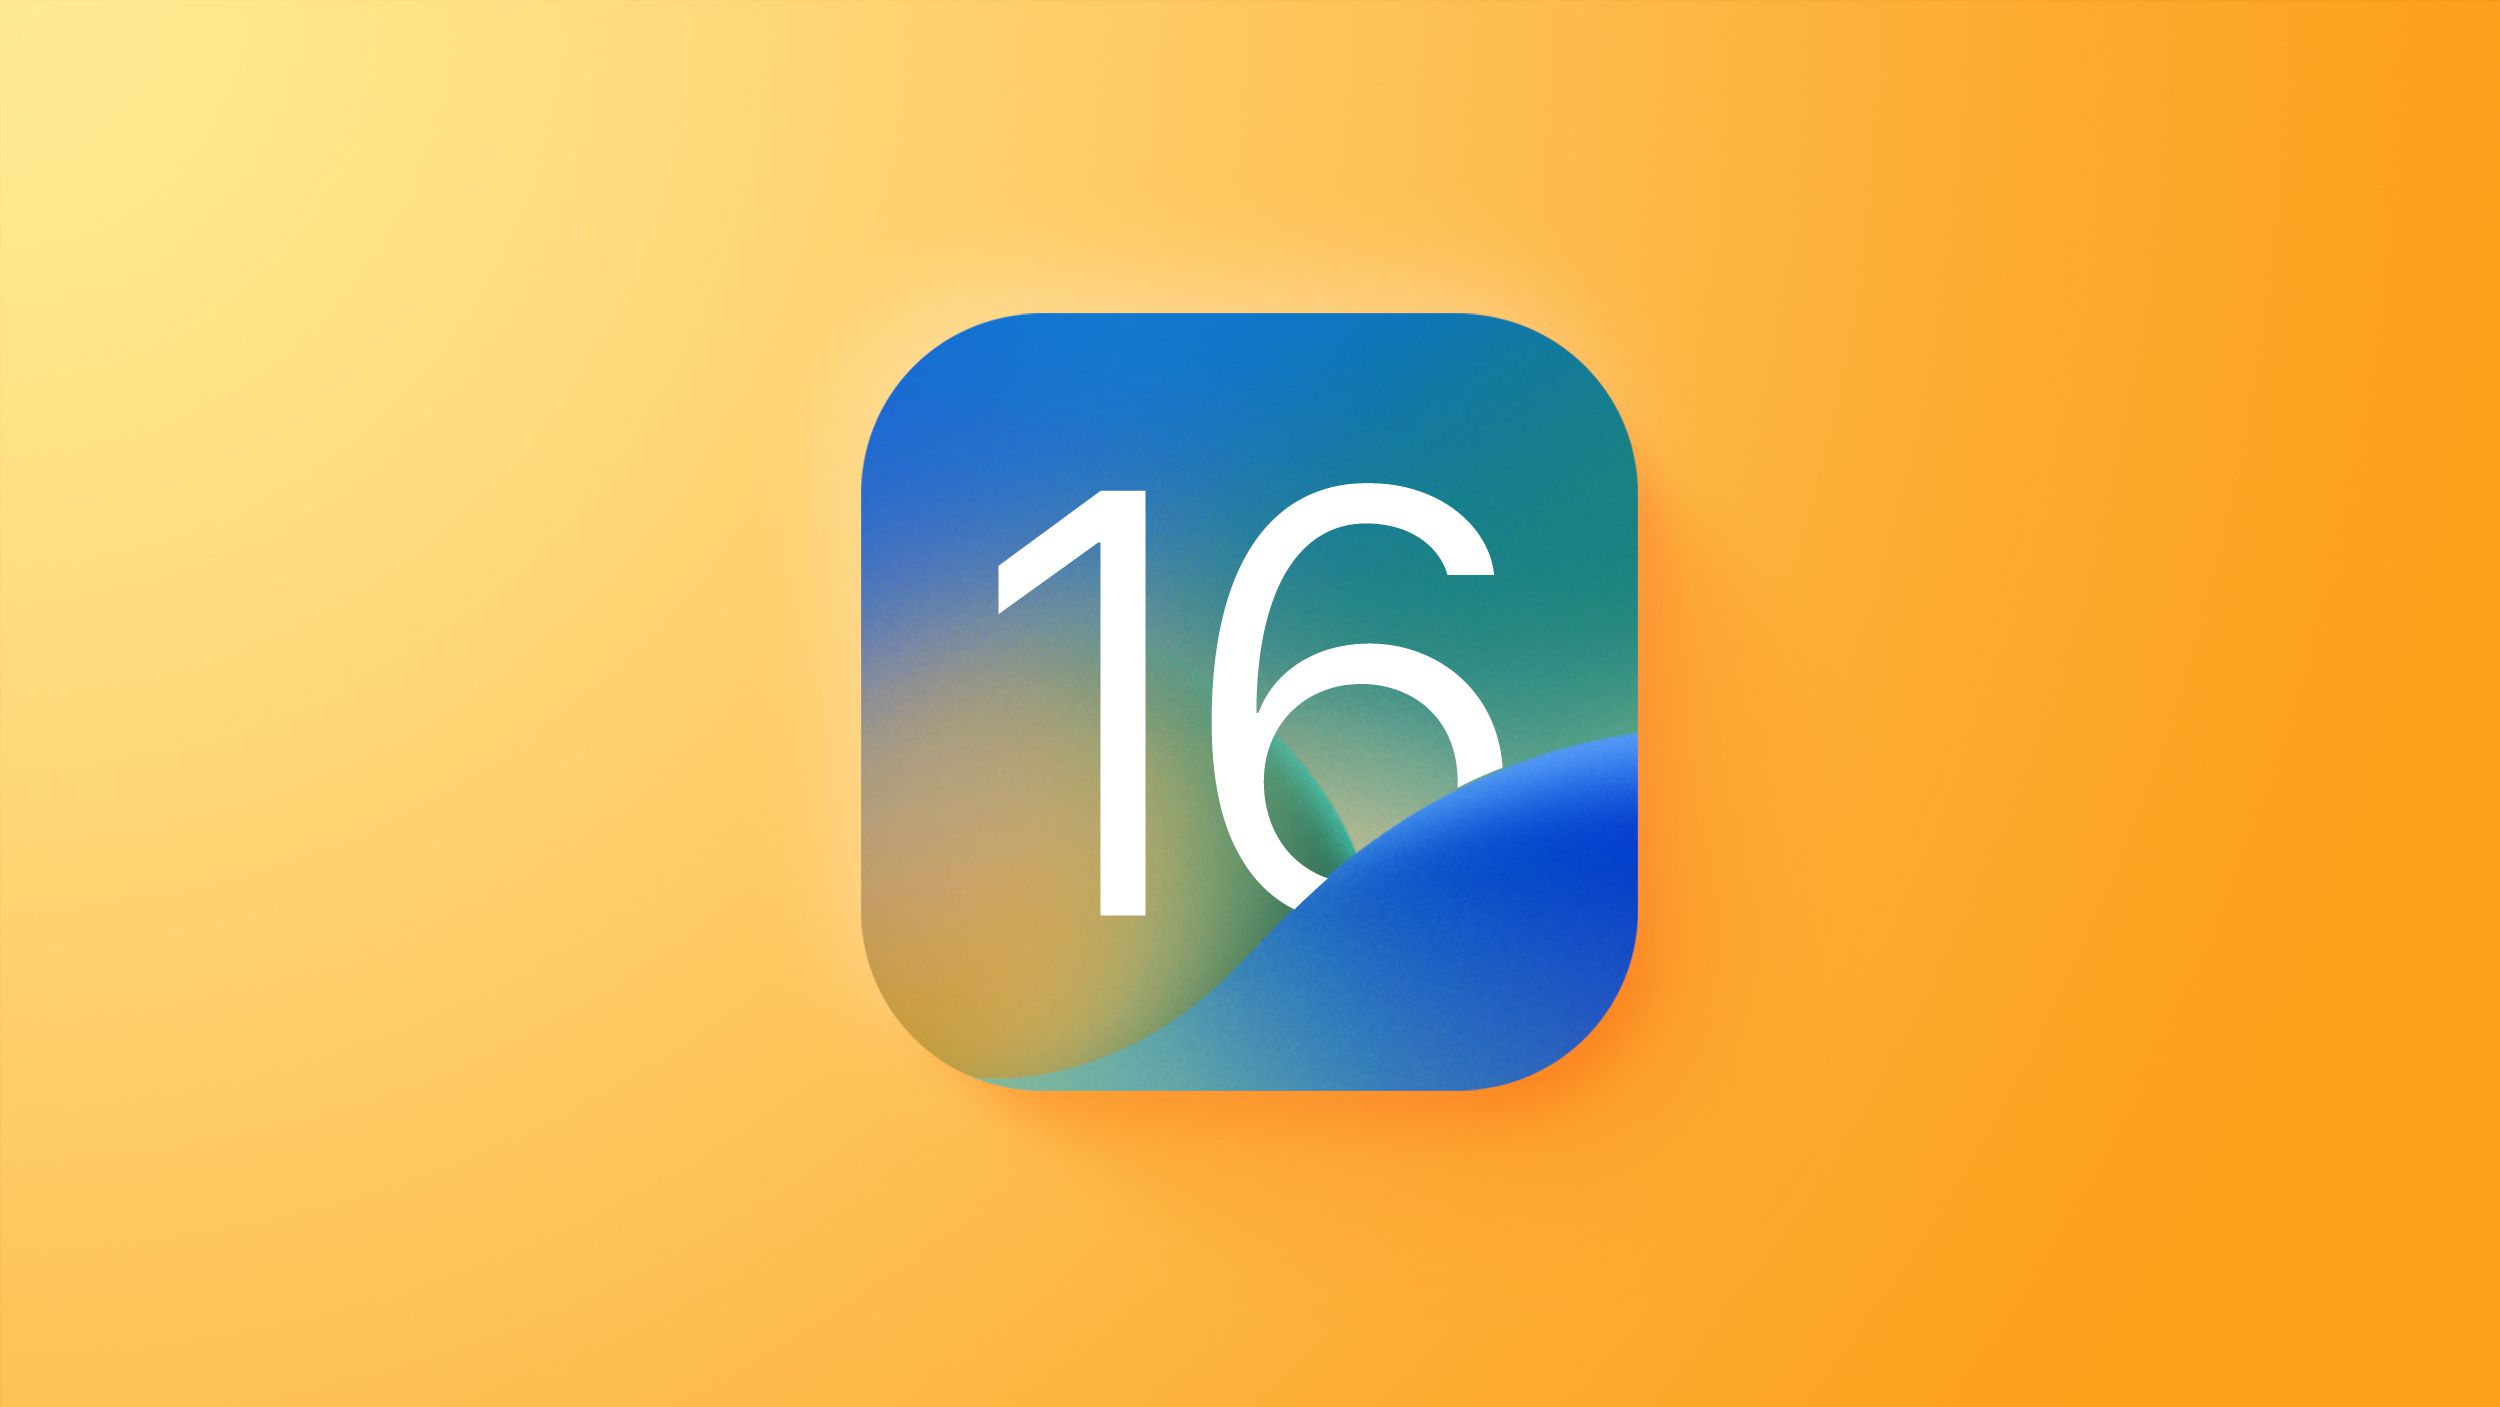 10 New iOS 16 Features Coming Later This Year